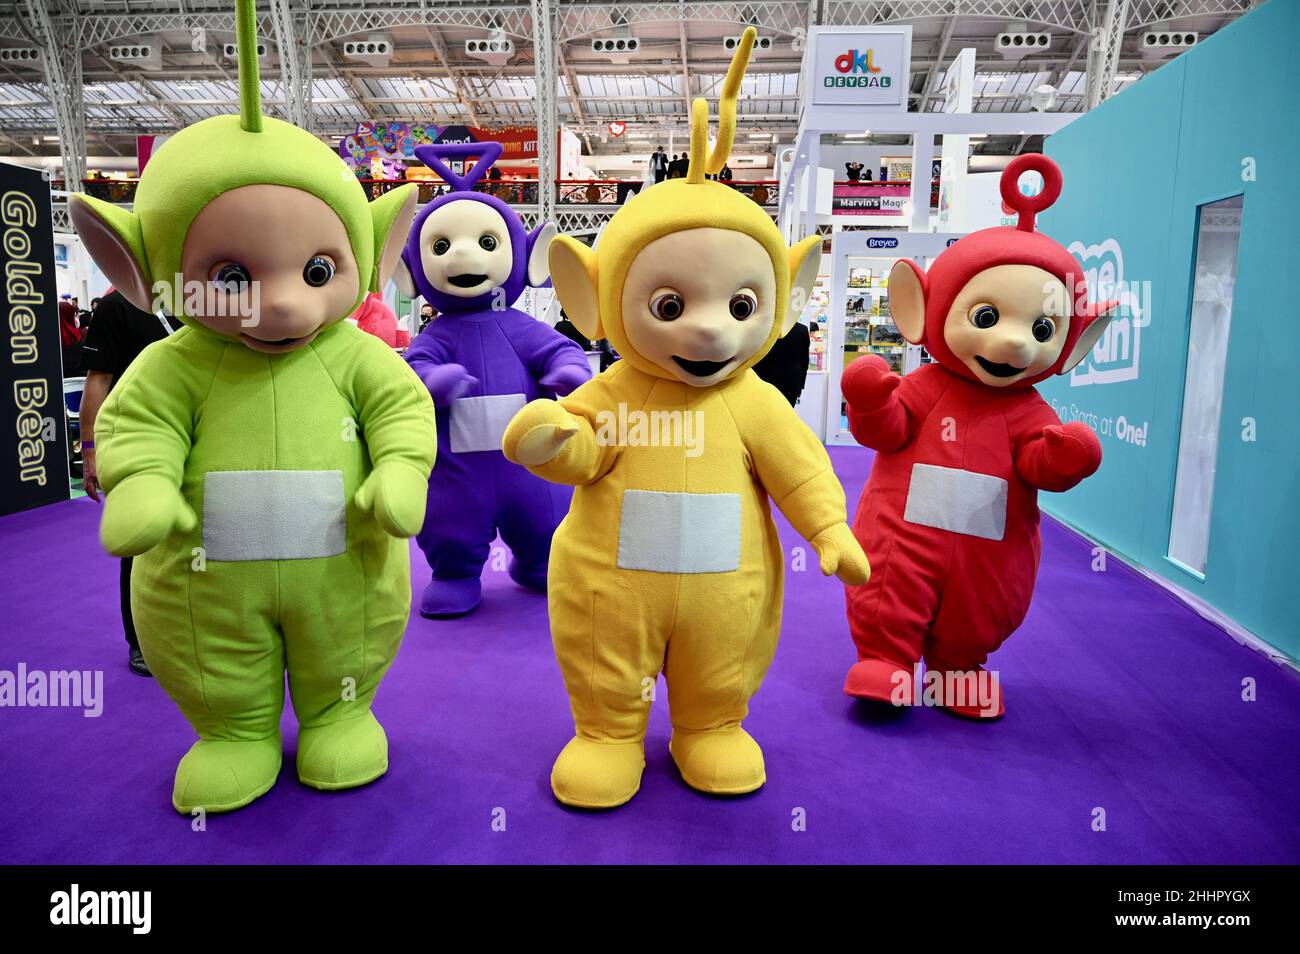 London, UK. Teletubbies, 68th Toy Fair held at Olympia Exhibition Centre the first following the COVID -19 Pandemic. The show themes are popular licenses, educational toys and family play. Credit: michael melia/Alamy Live News Stock Photo